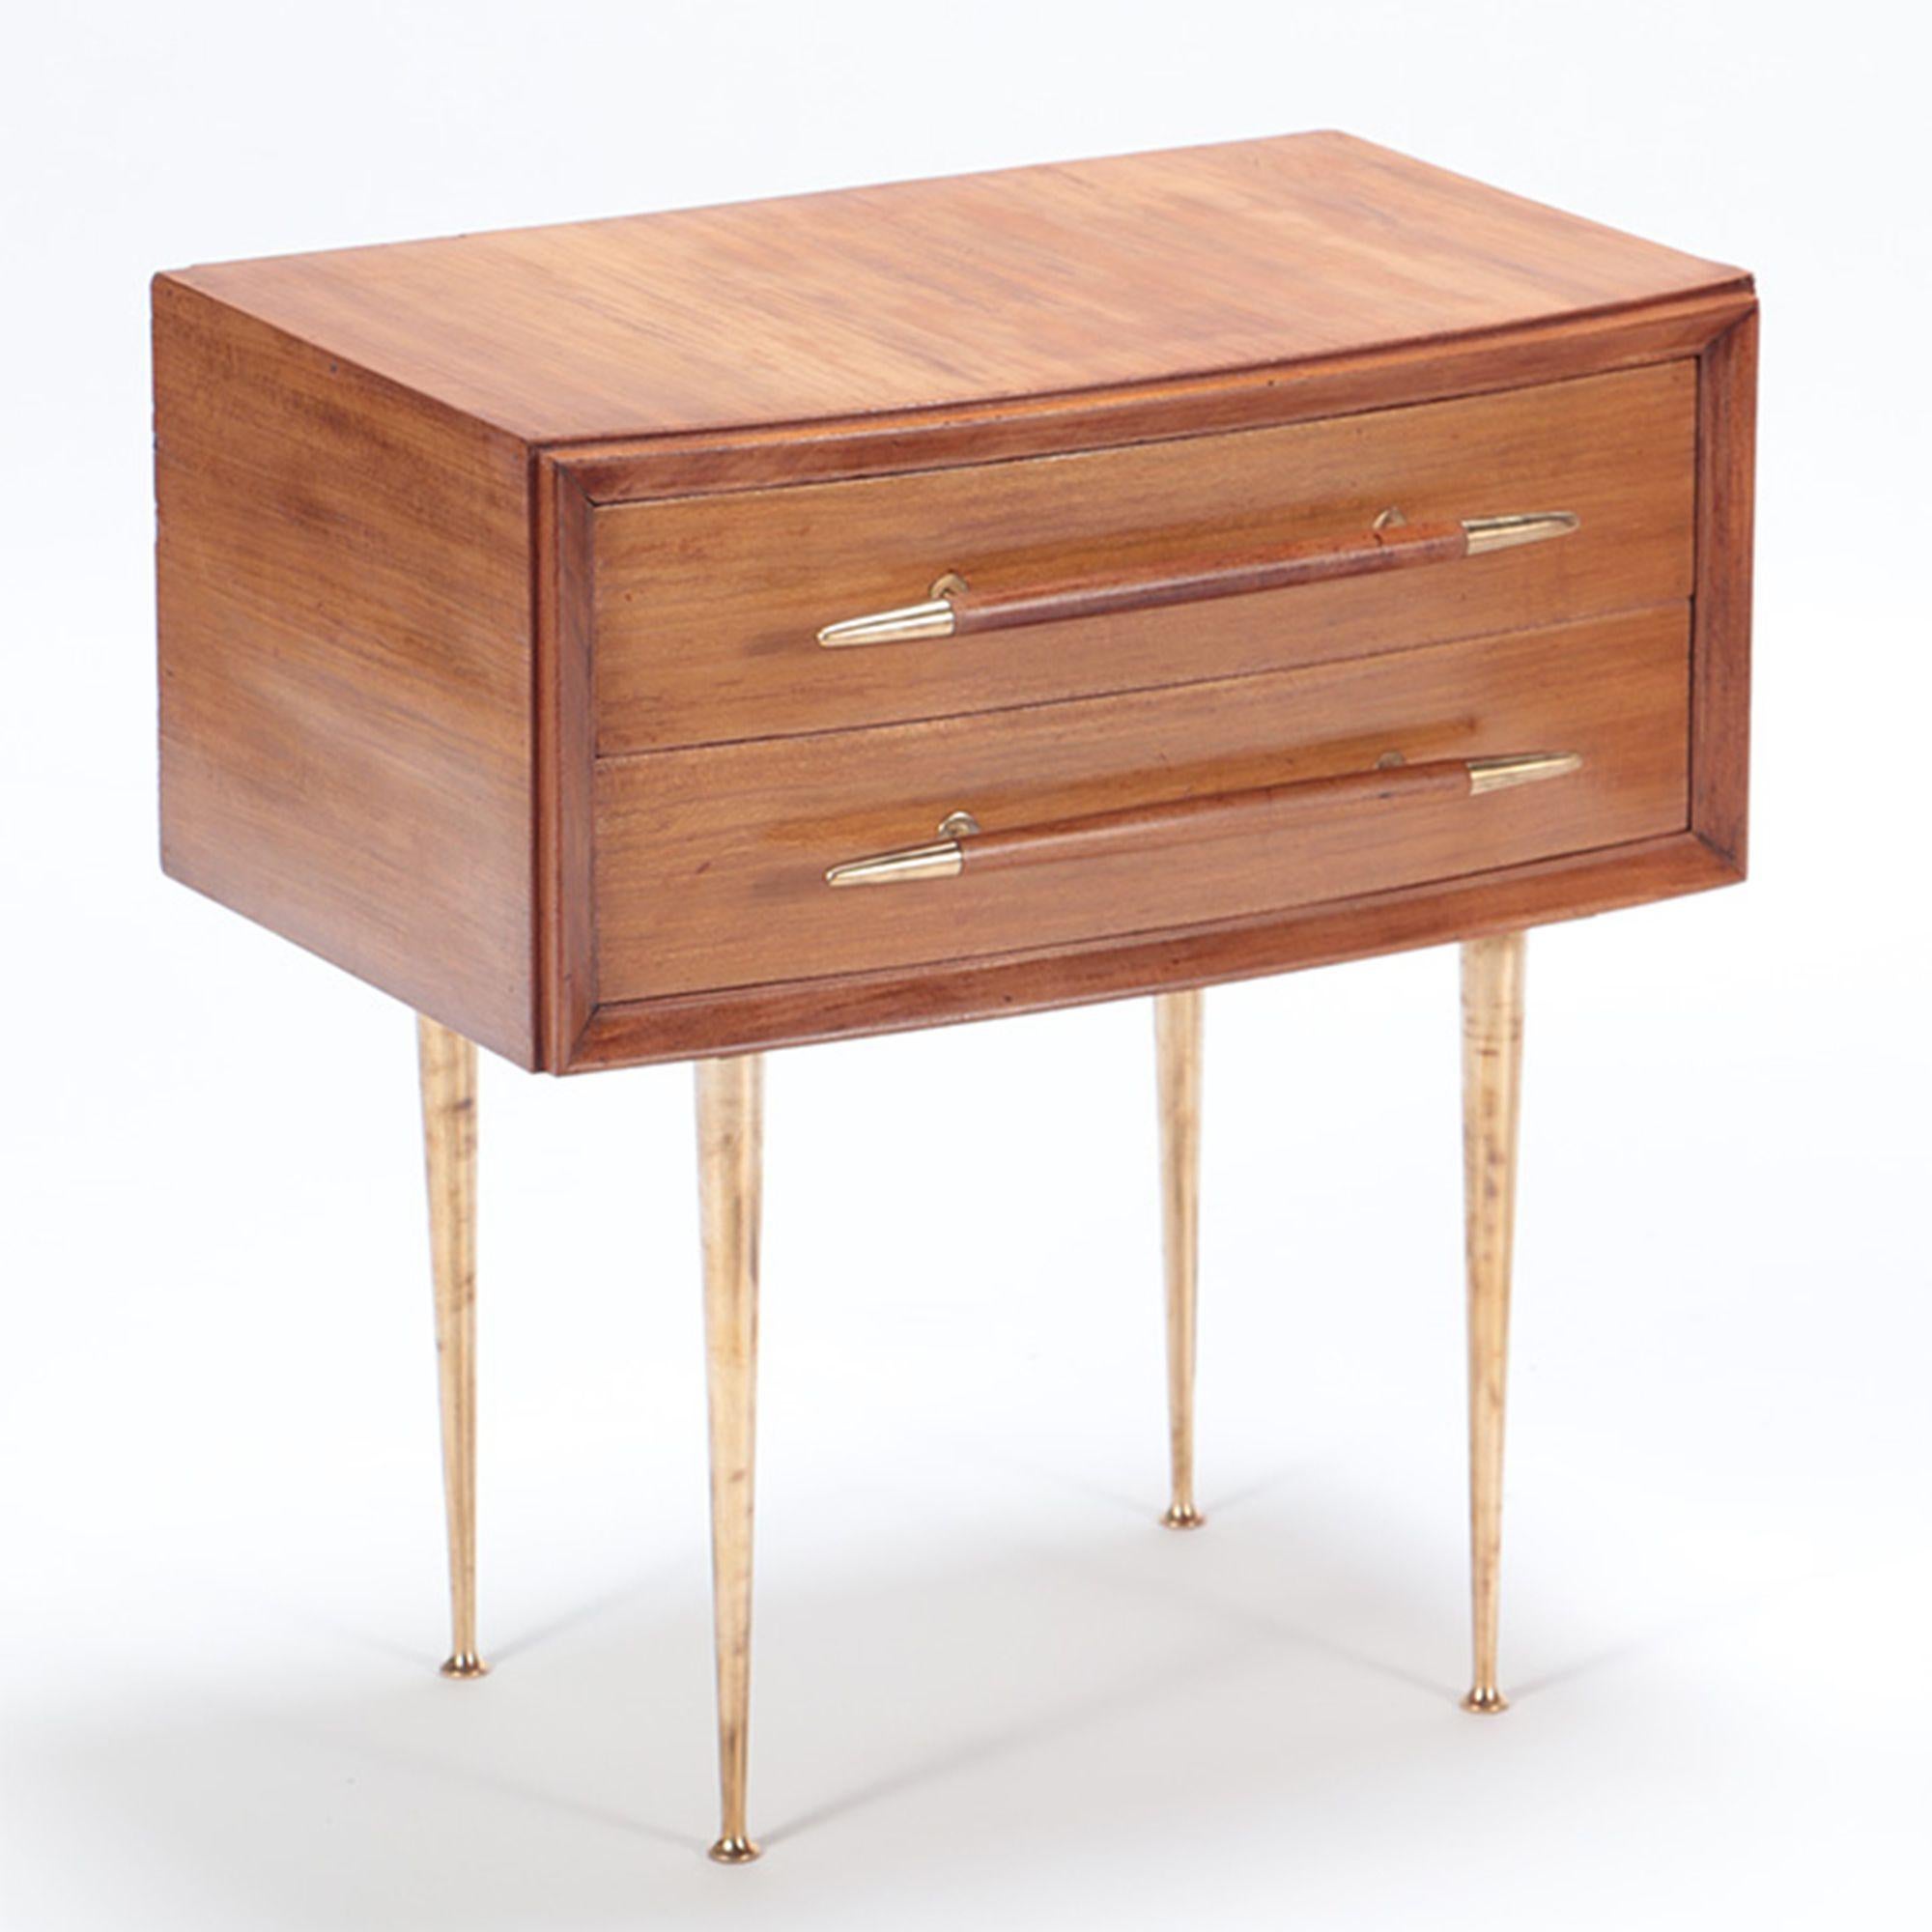 A pair of Mid-Century Modern walnut and brass night stands in the manner of T.H. Robsjohn Gibbings. circa 1955.